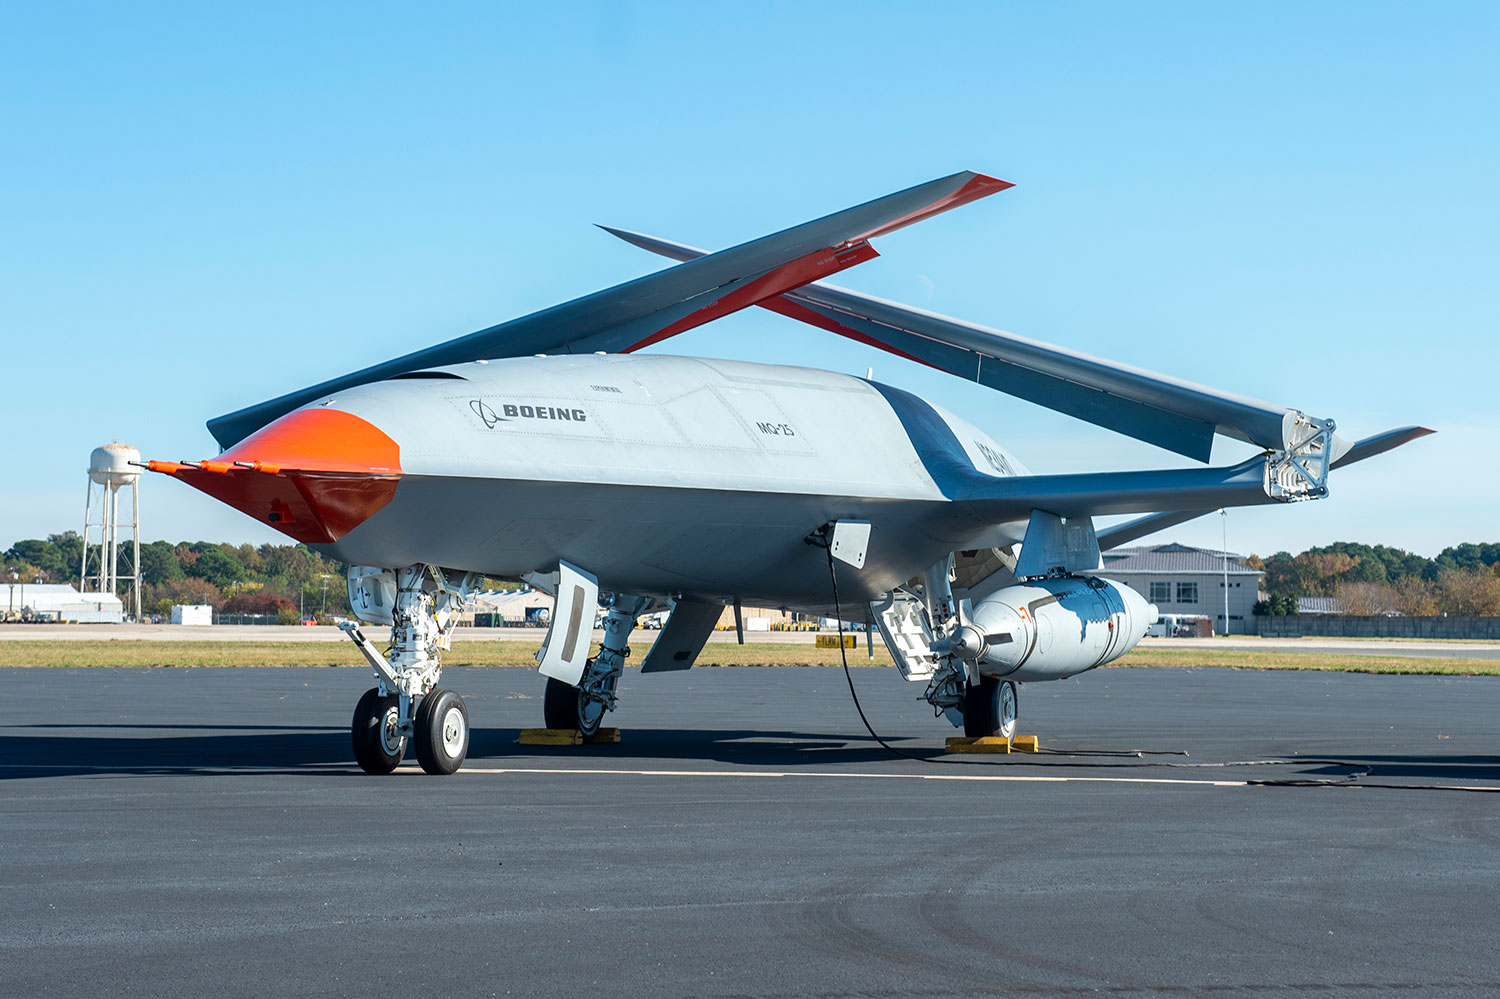 The US Navy and Boeing conducted ground testing of the MQ-25 Stingray at Chambers Field.